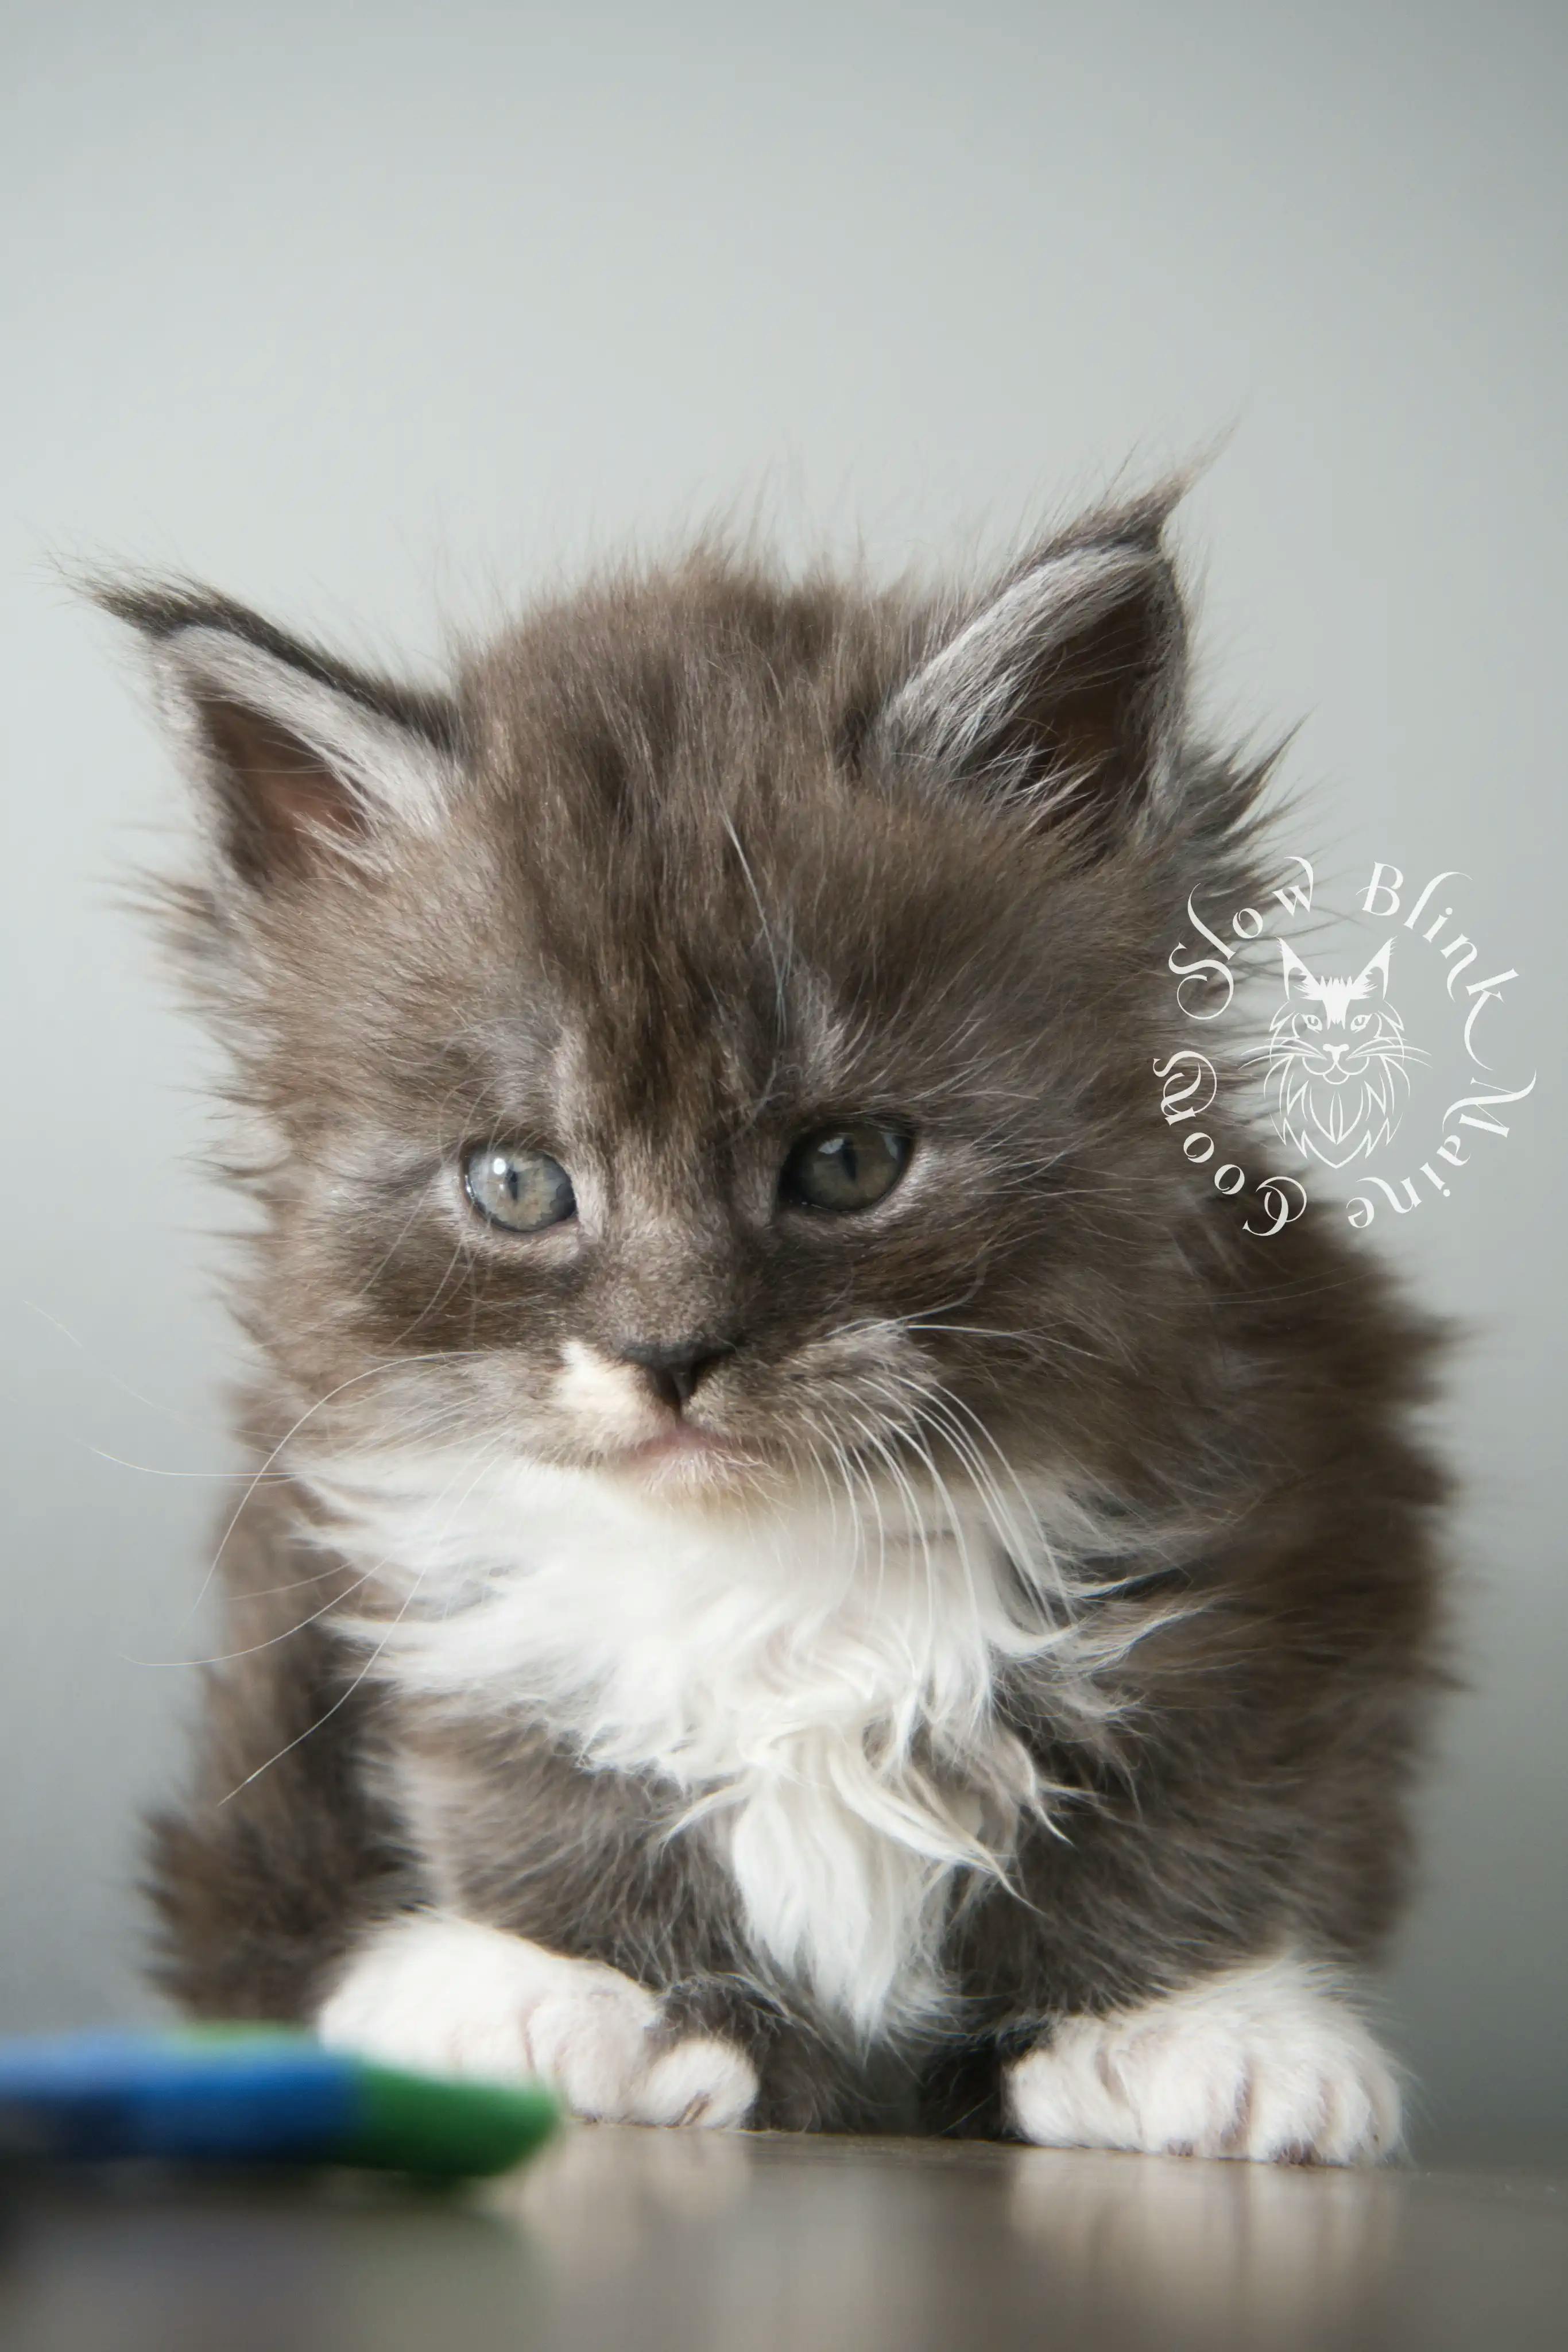 Bicolor Maine Coon Kittens > bicolor maine coon kitten | slowblinkmainecoons | ems code ns as 03 09 | 02 | 120